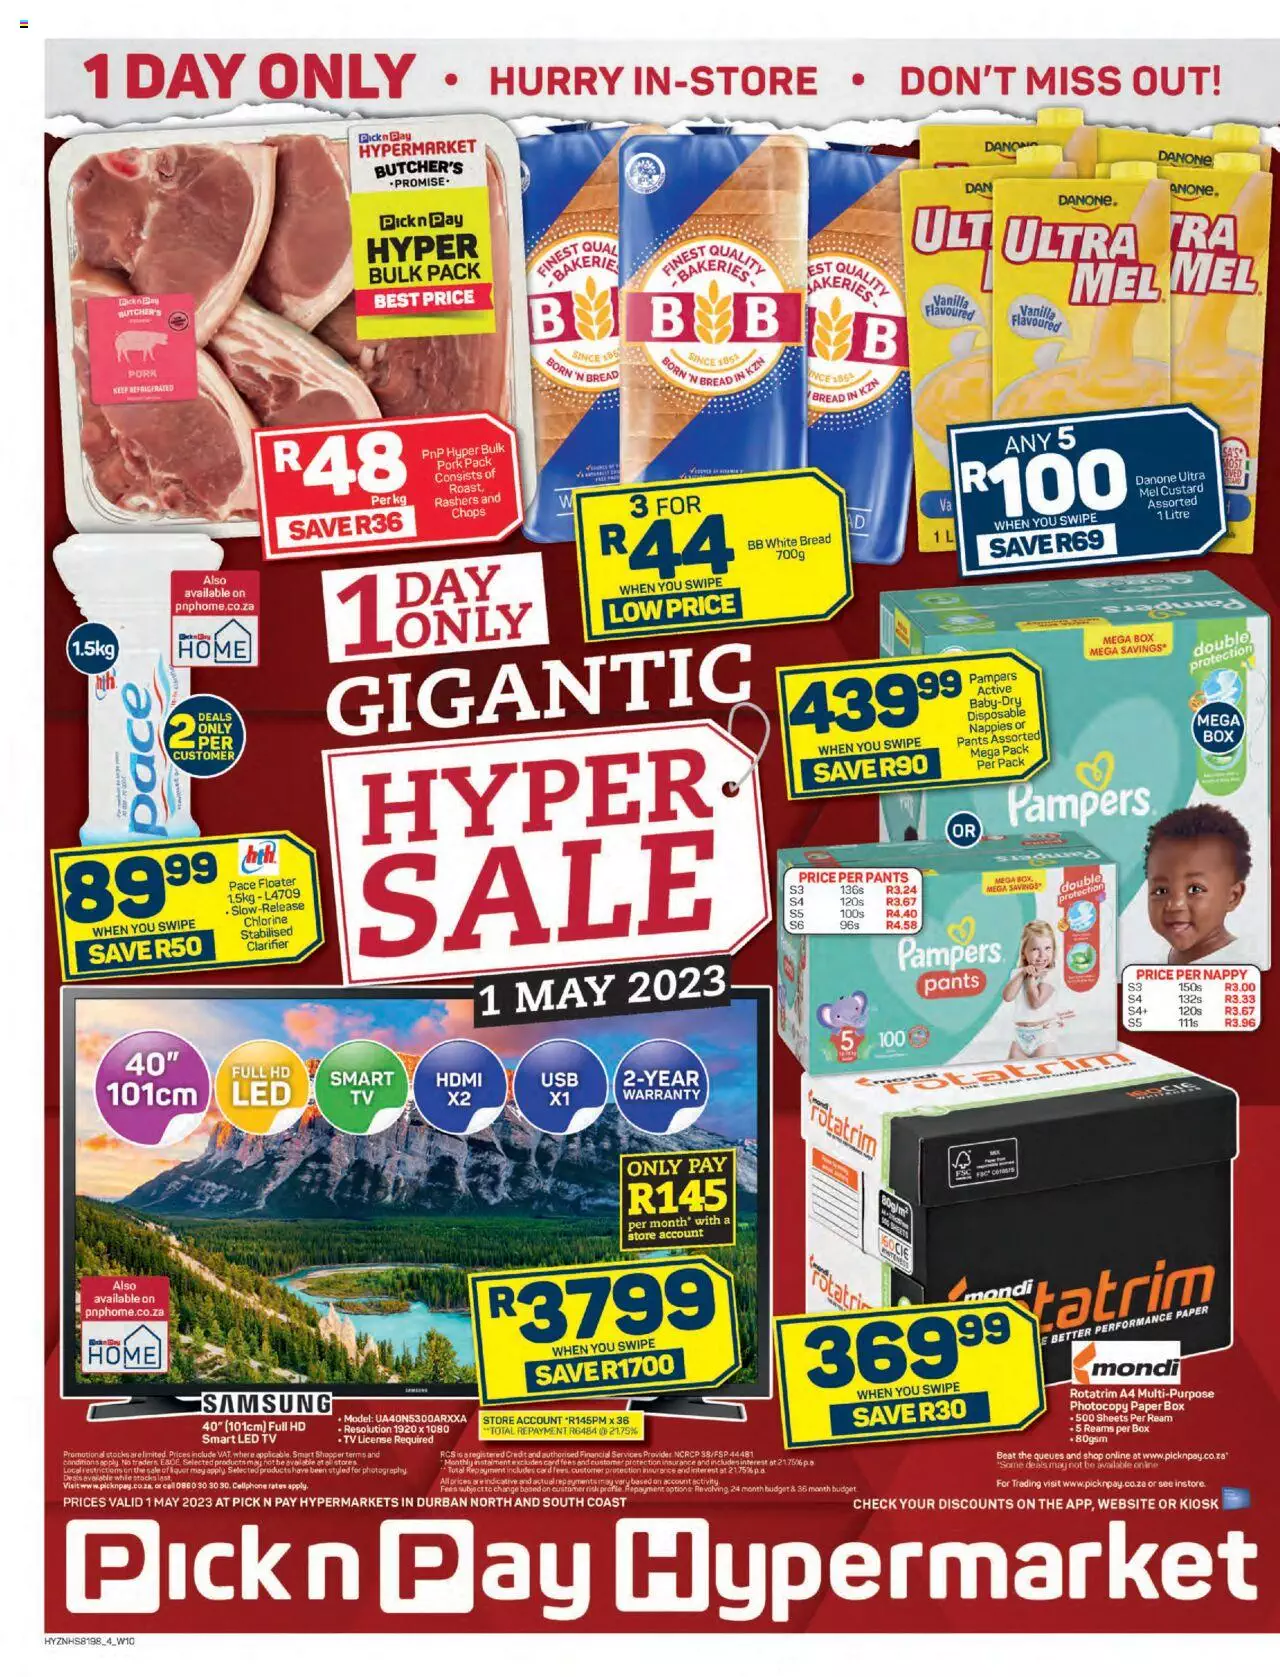 Pick n Pay Specials Gigantic Hyper Sale 1 May 2023